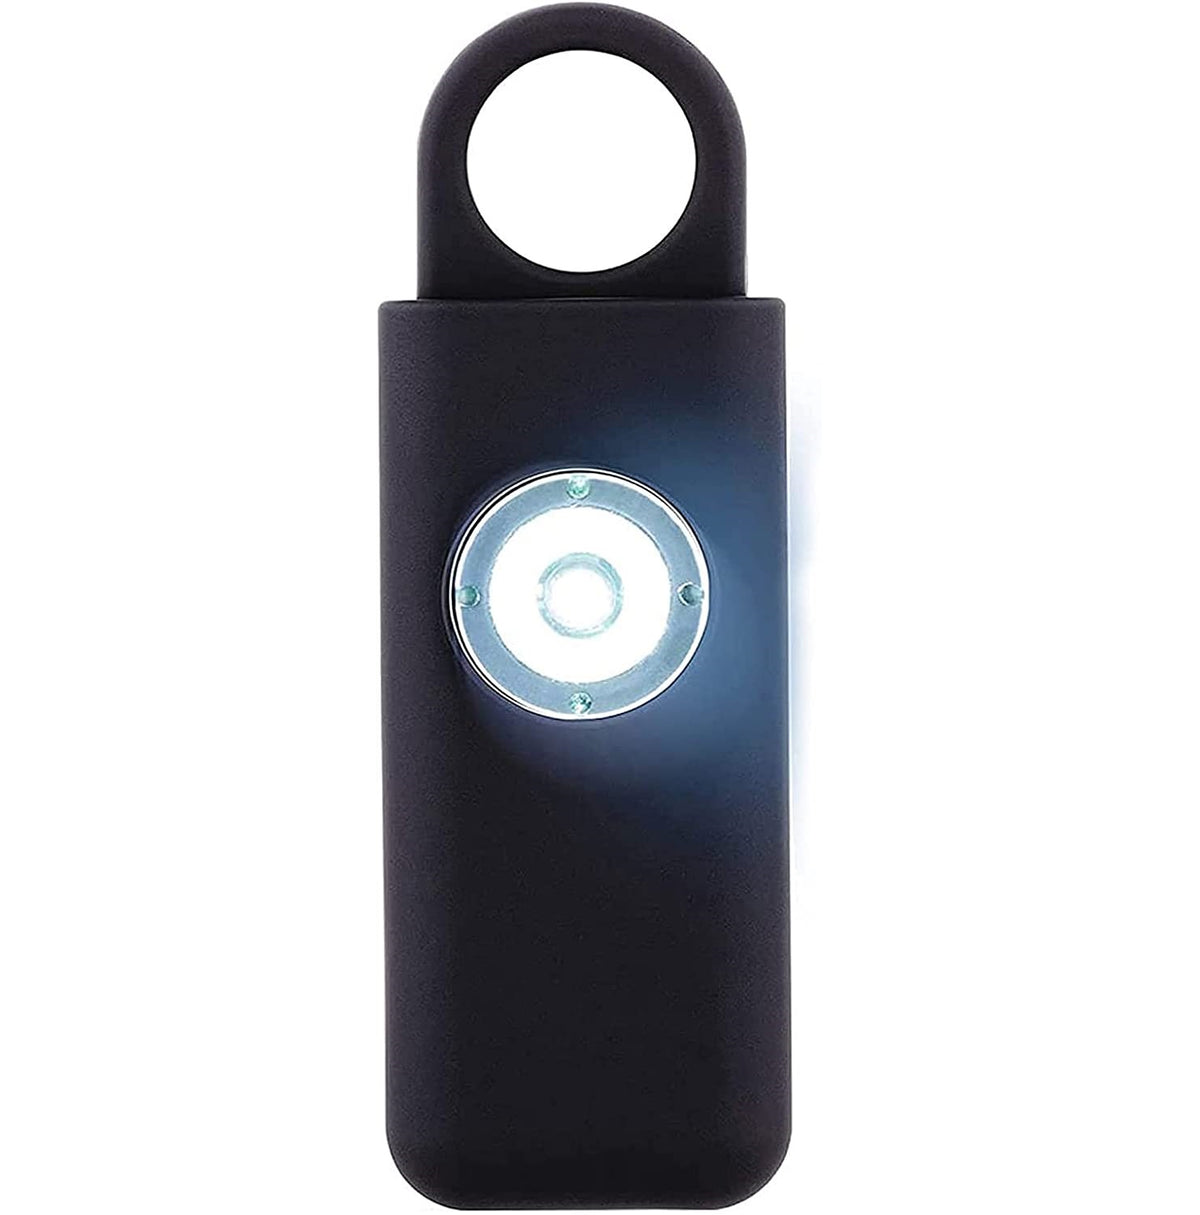 Alarm with Strobe Light and Key Chain